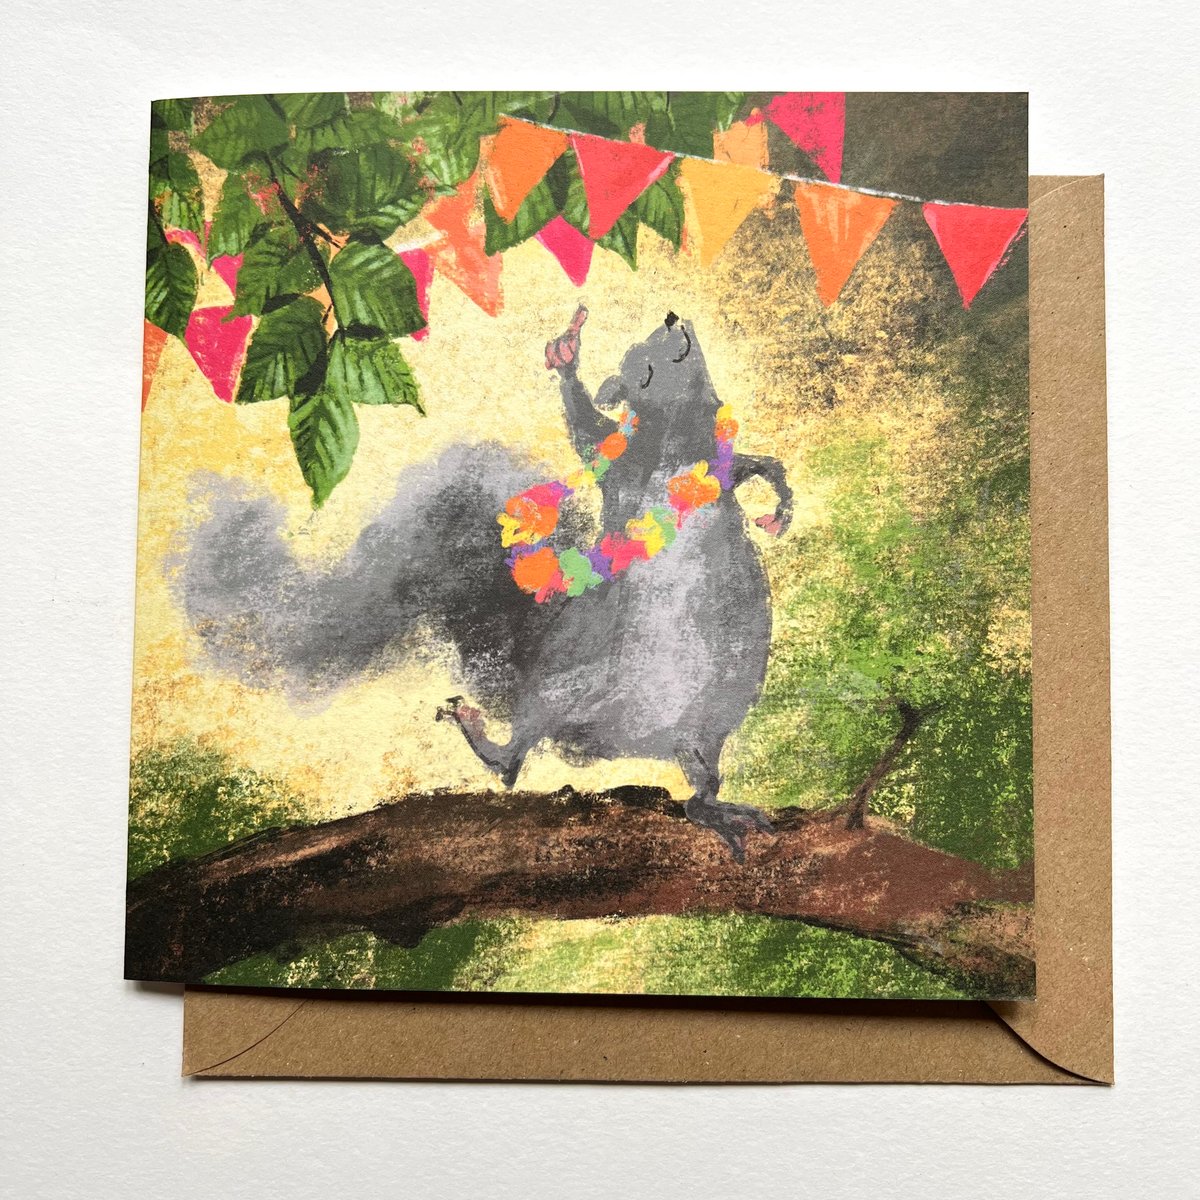 Image of Woodland Creatures - Set of 4 Luxury Greetings Cards